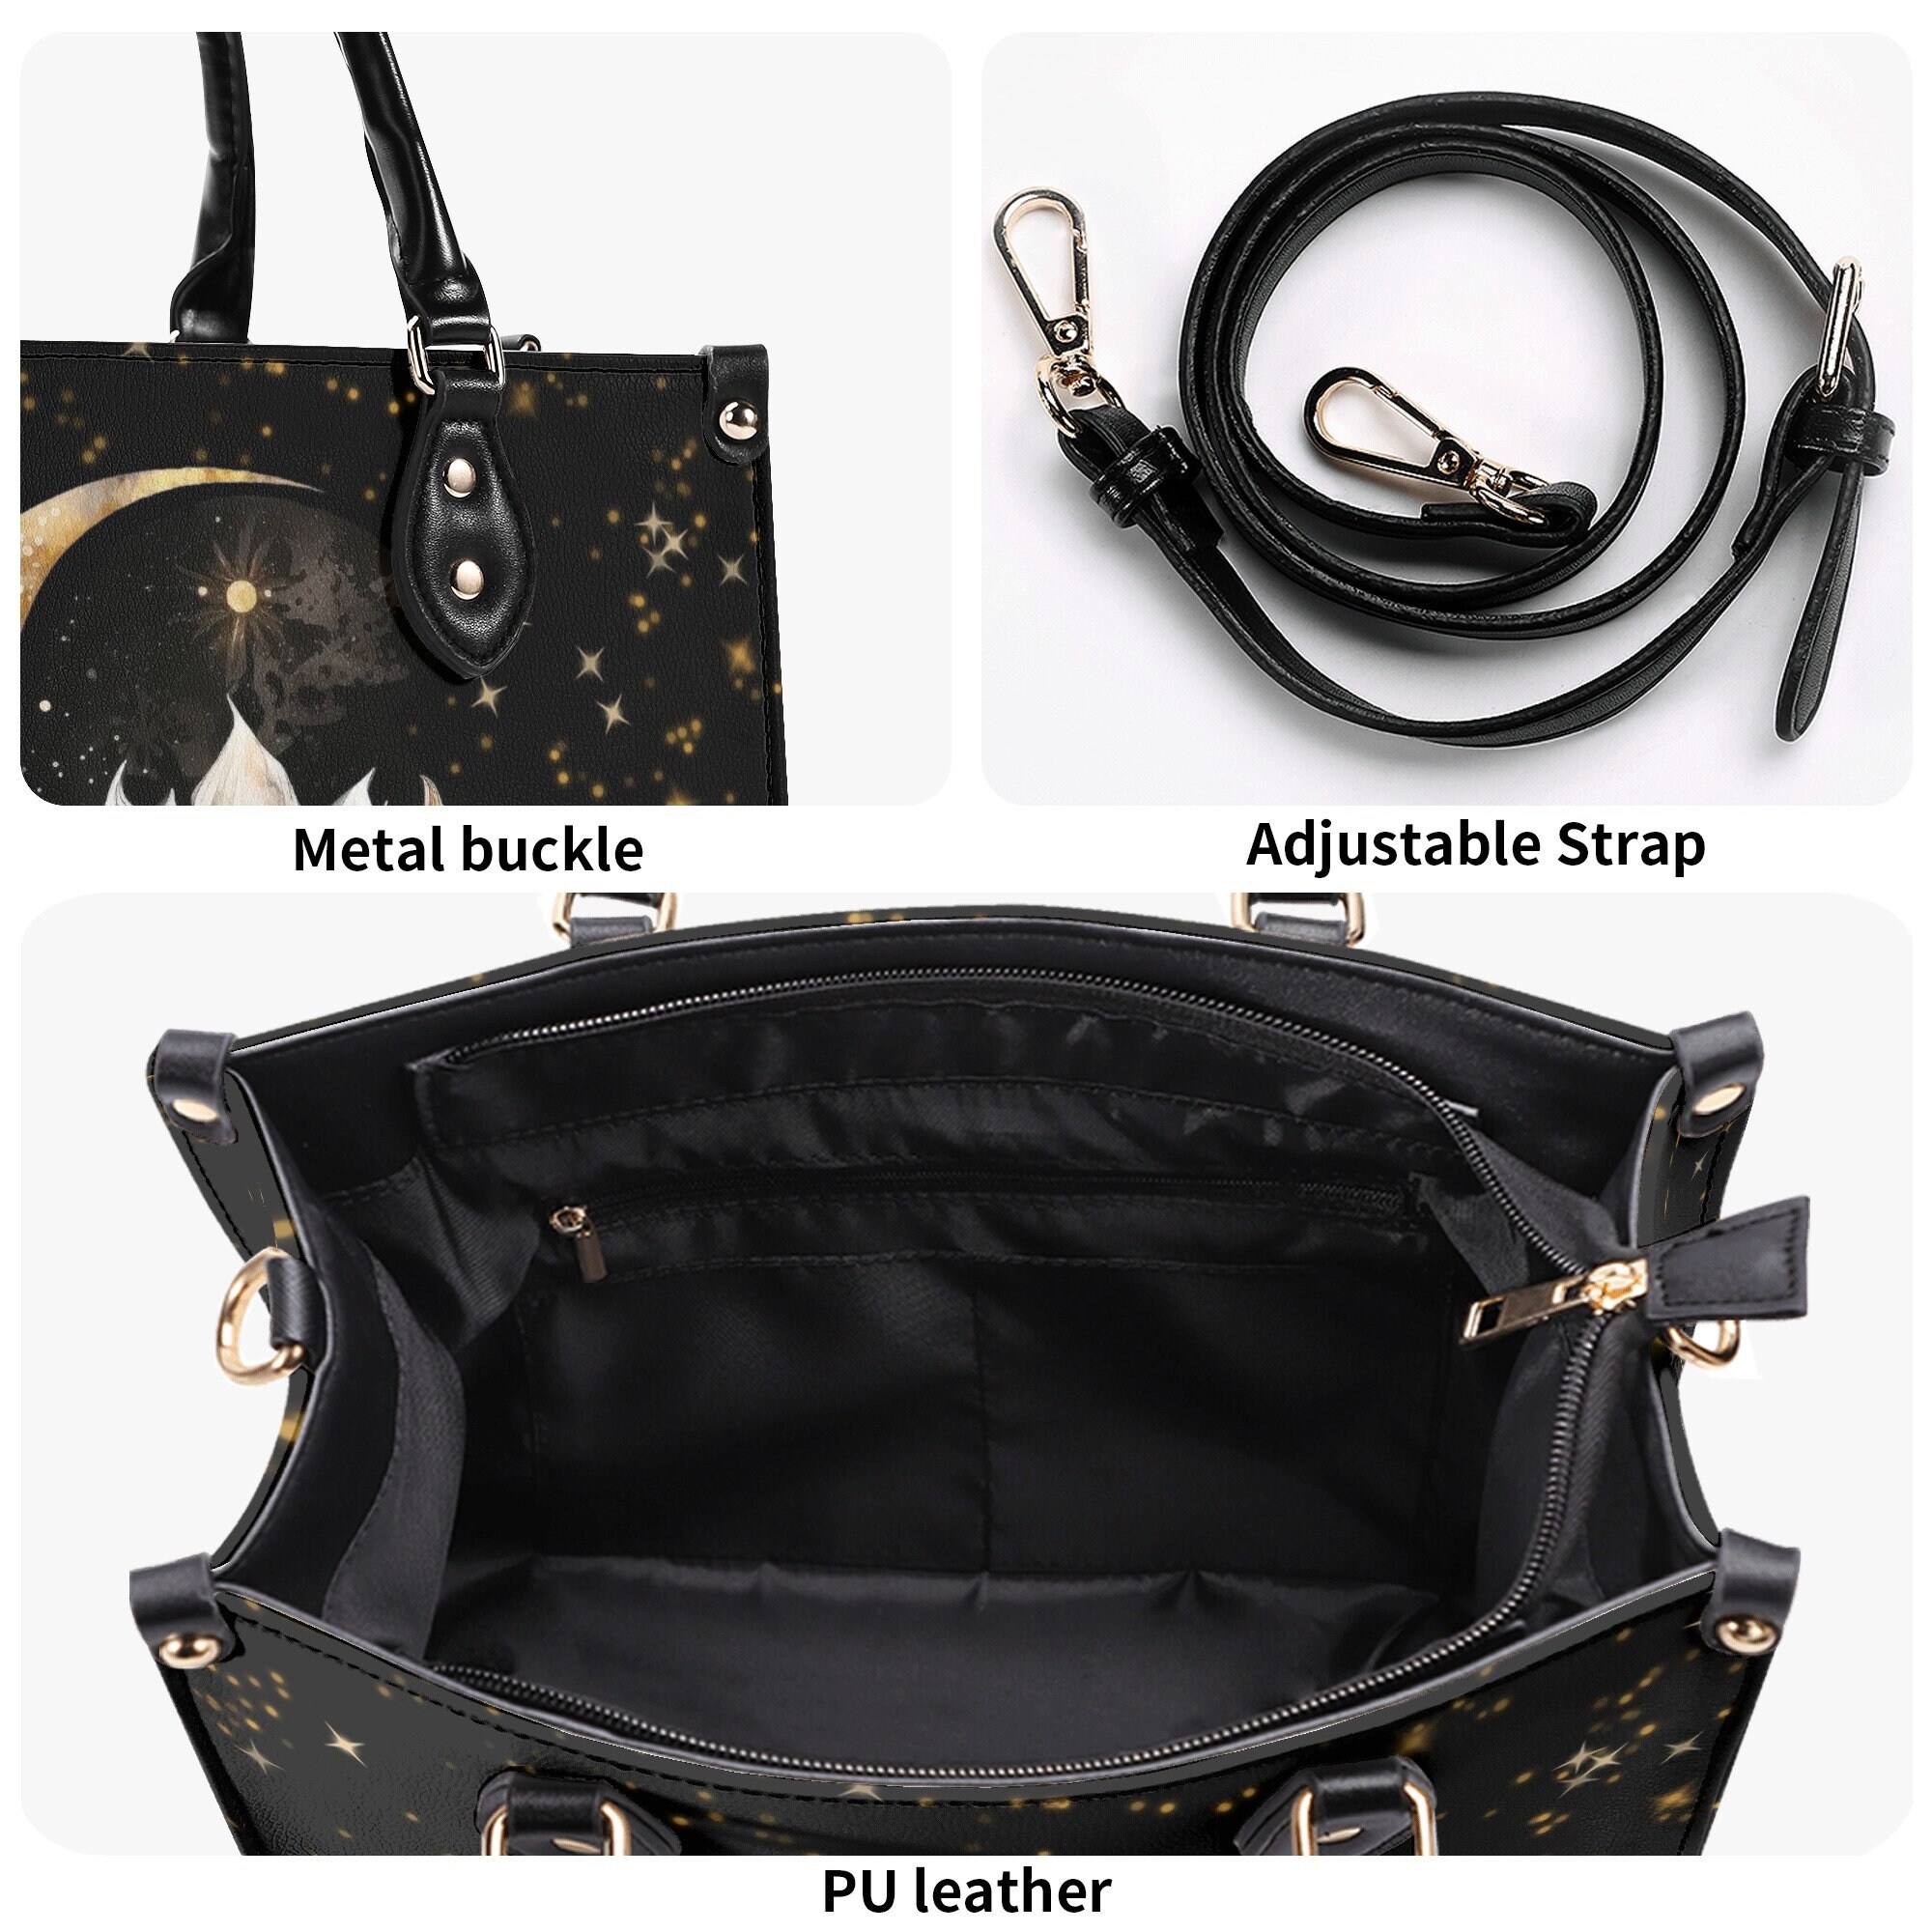 Witchy Lotus and Crescent Moon Faux Leather Purse, Cute women Hand Bag